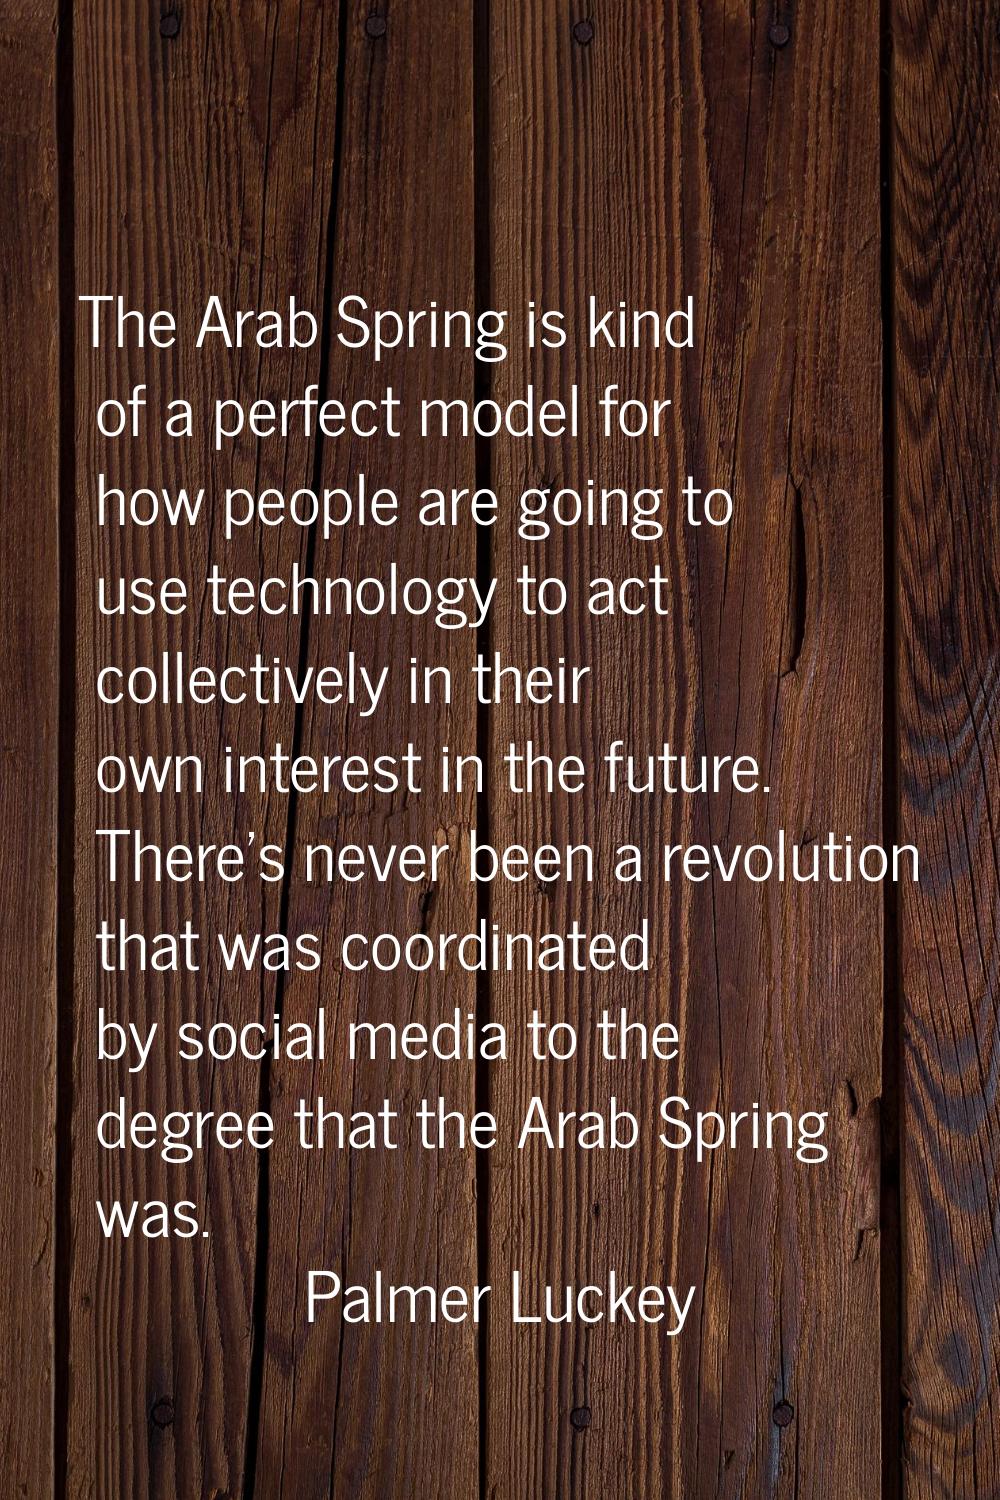 The Arab Spring is kind of a perfect model for how people are going to use technology to act collec